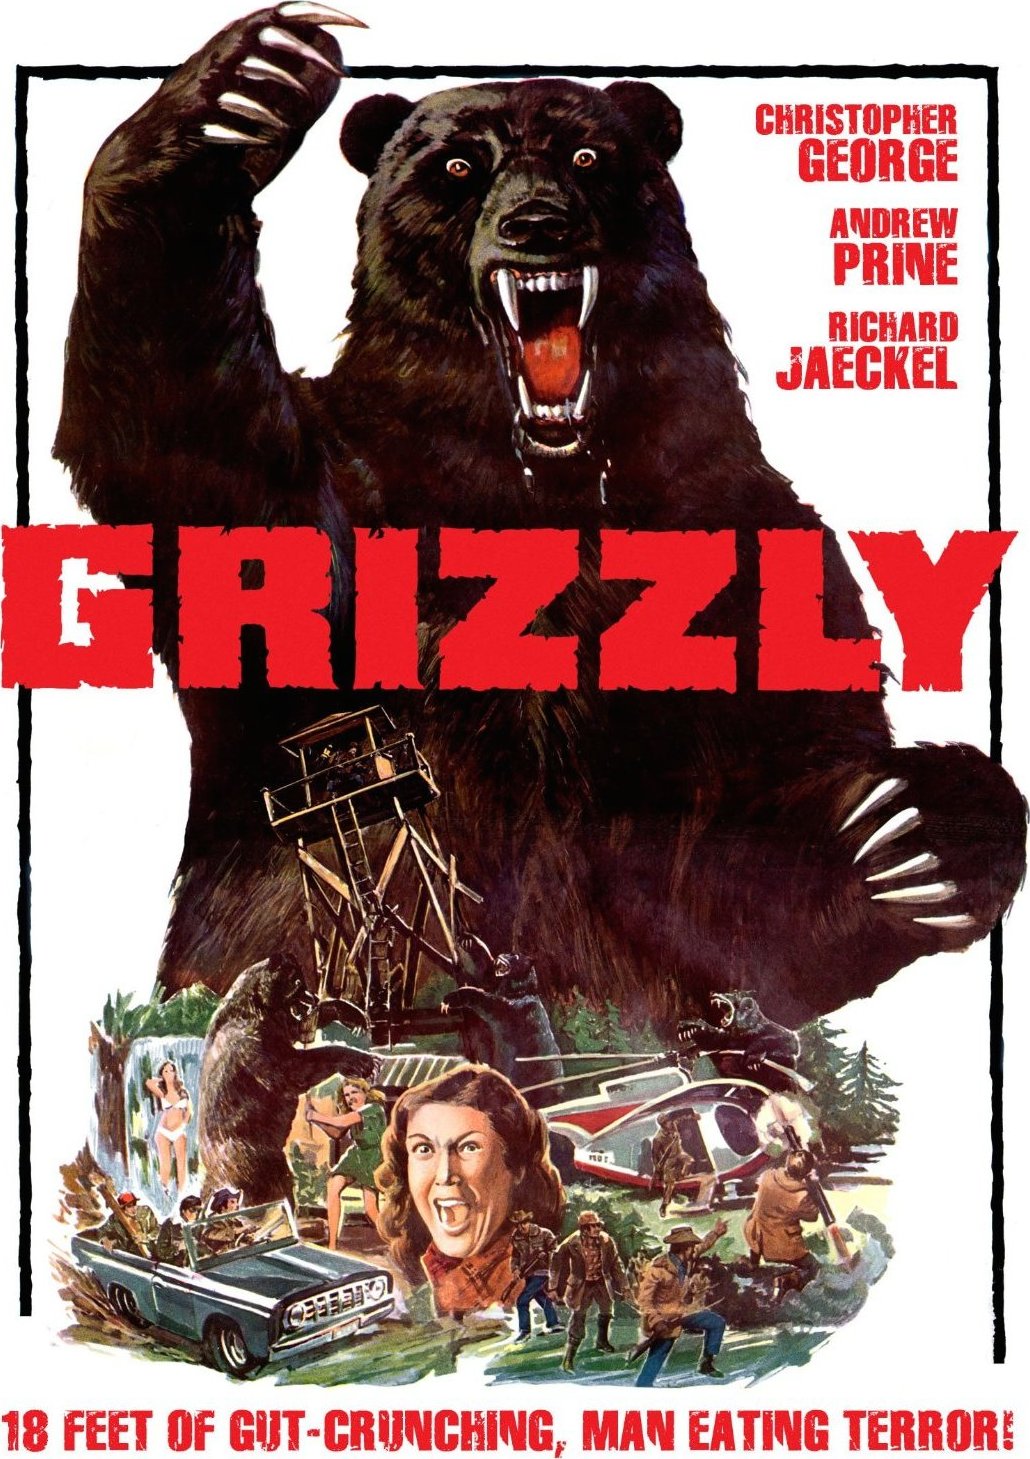 GRIZZLY (SCORPION) DVD